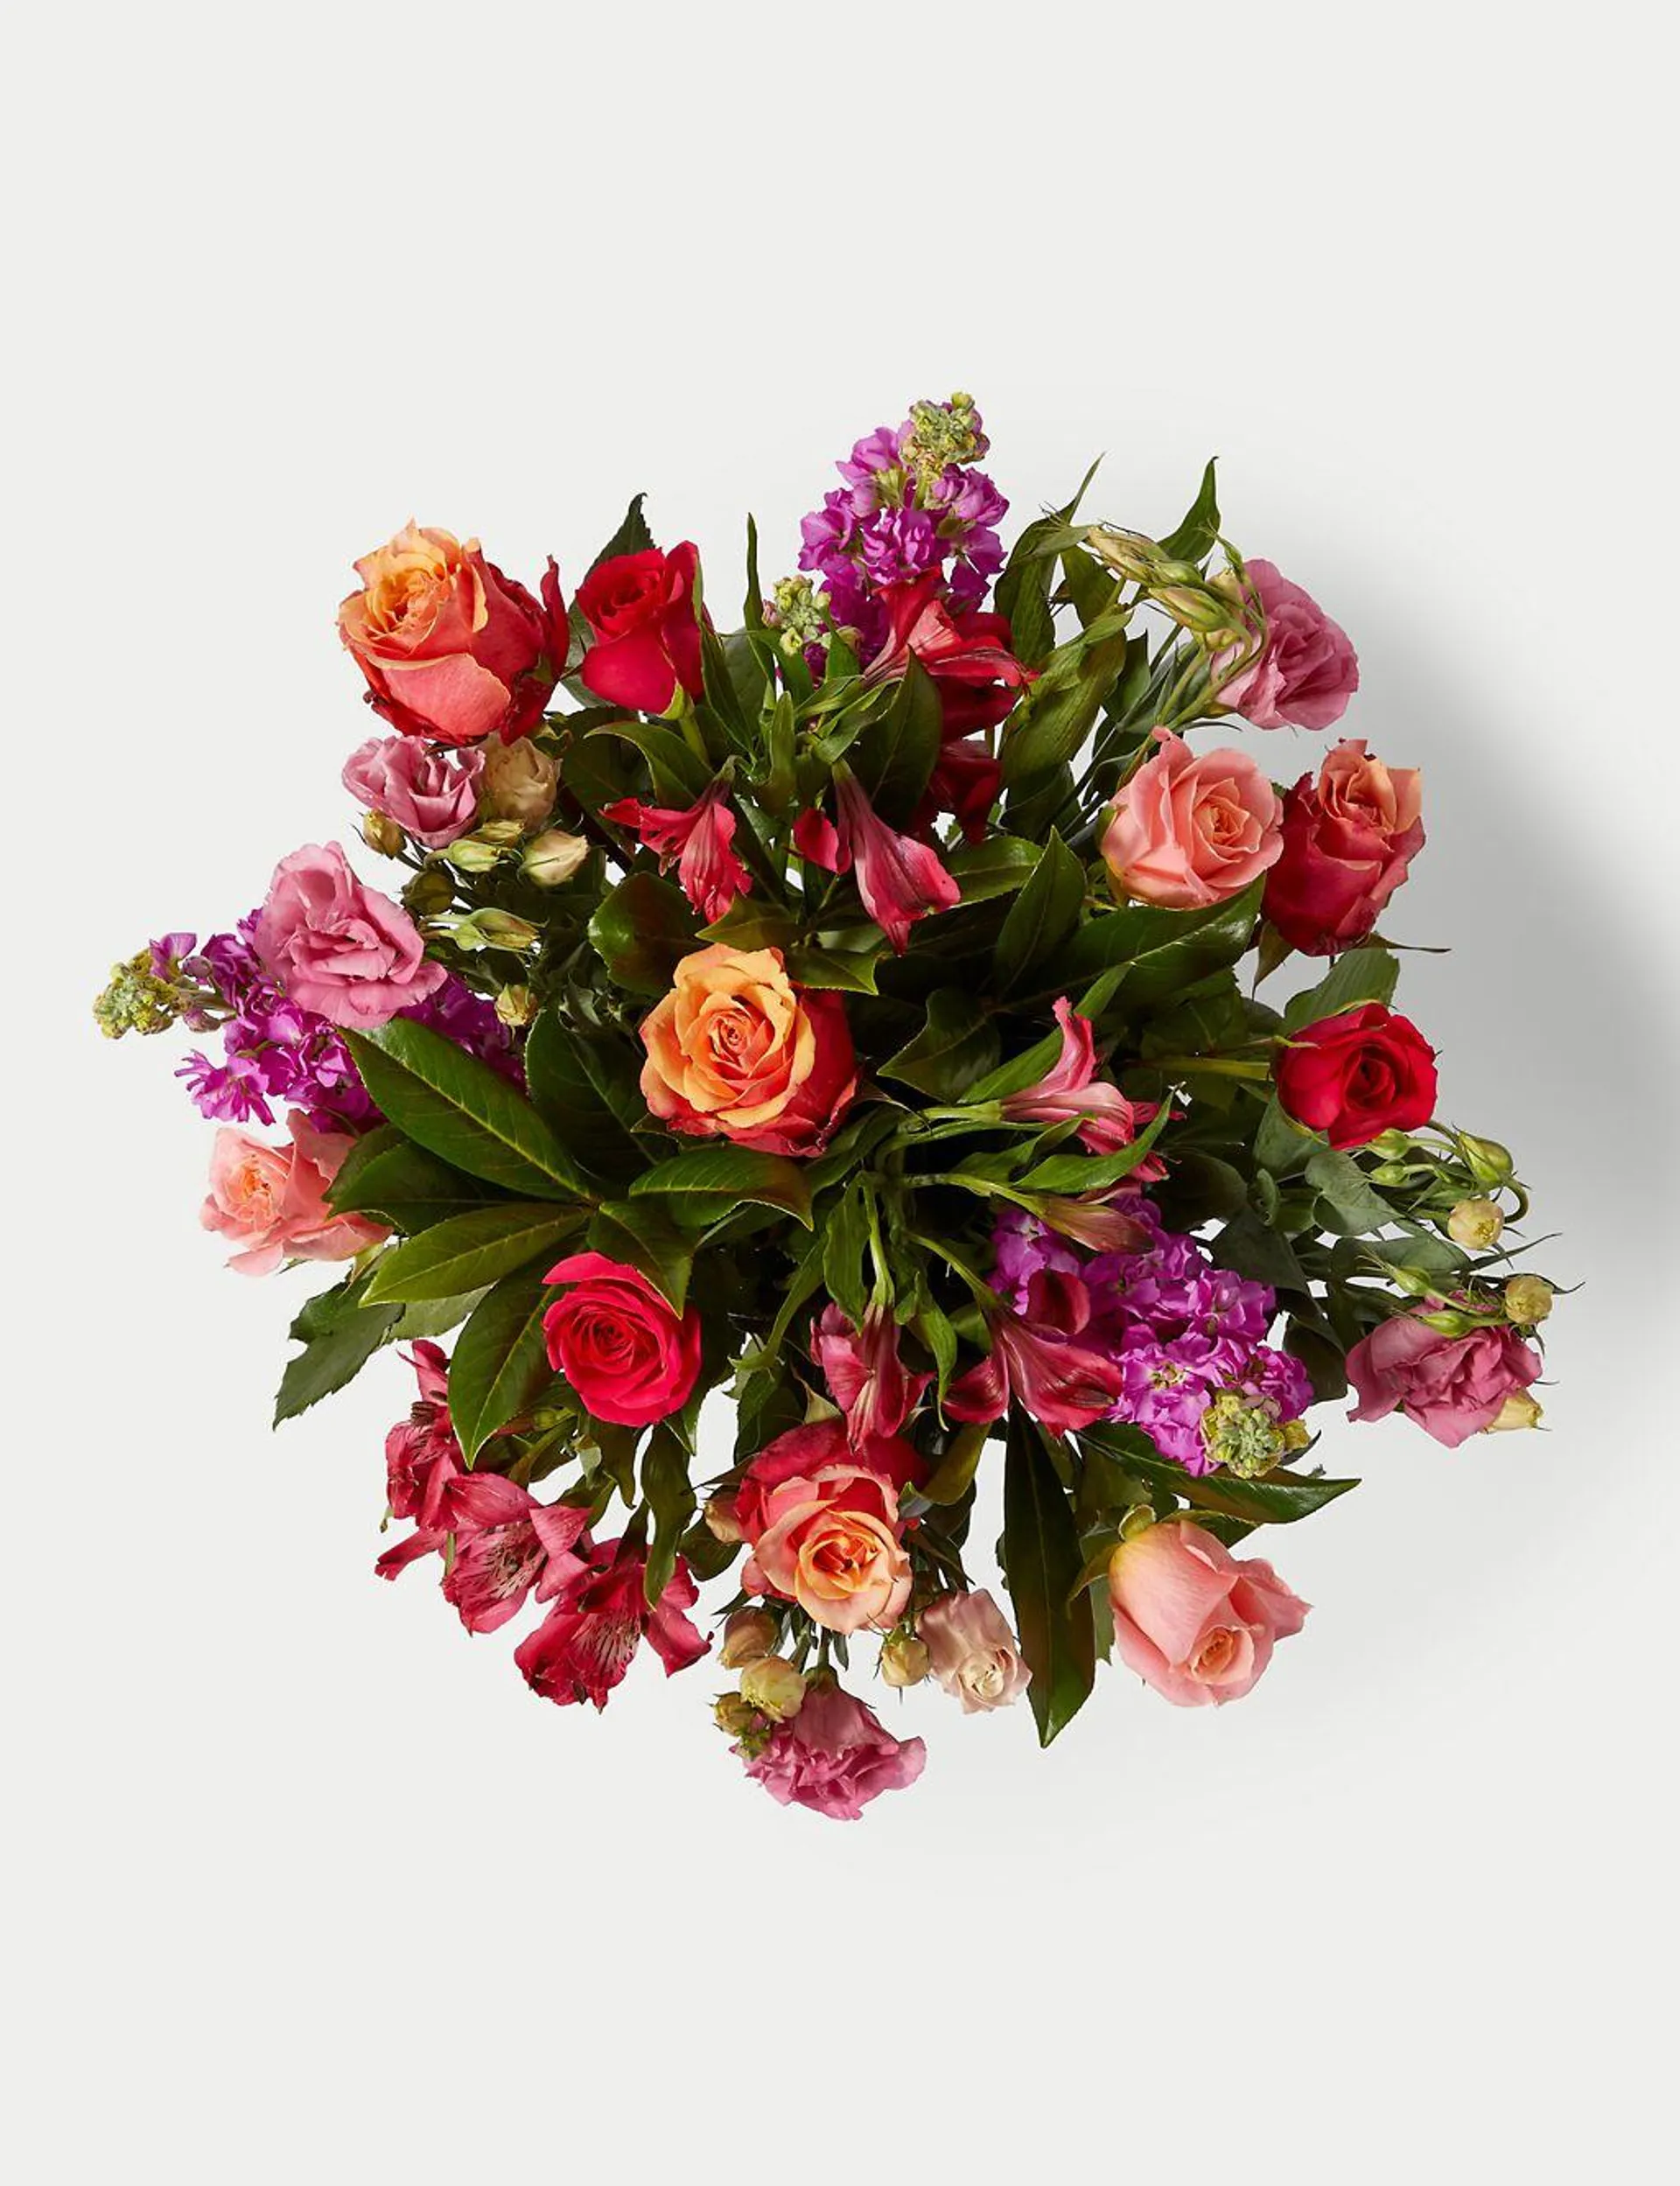 Roses, Lisianthus & Stock Bright Bouquet With Caramel collection